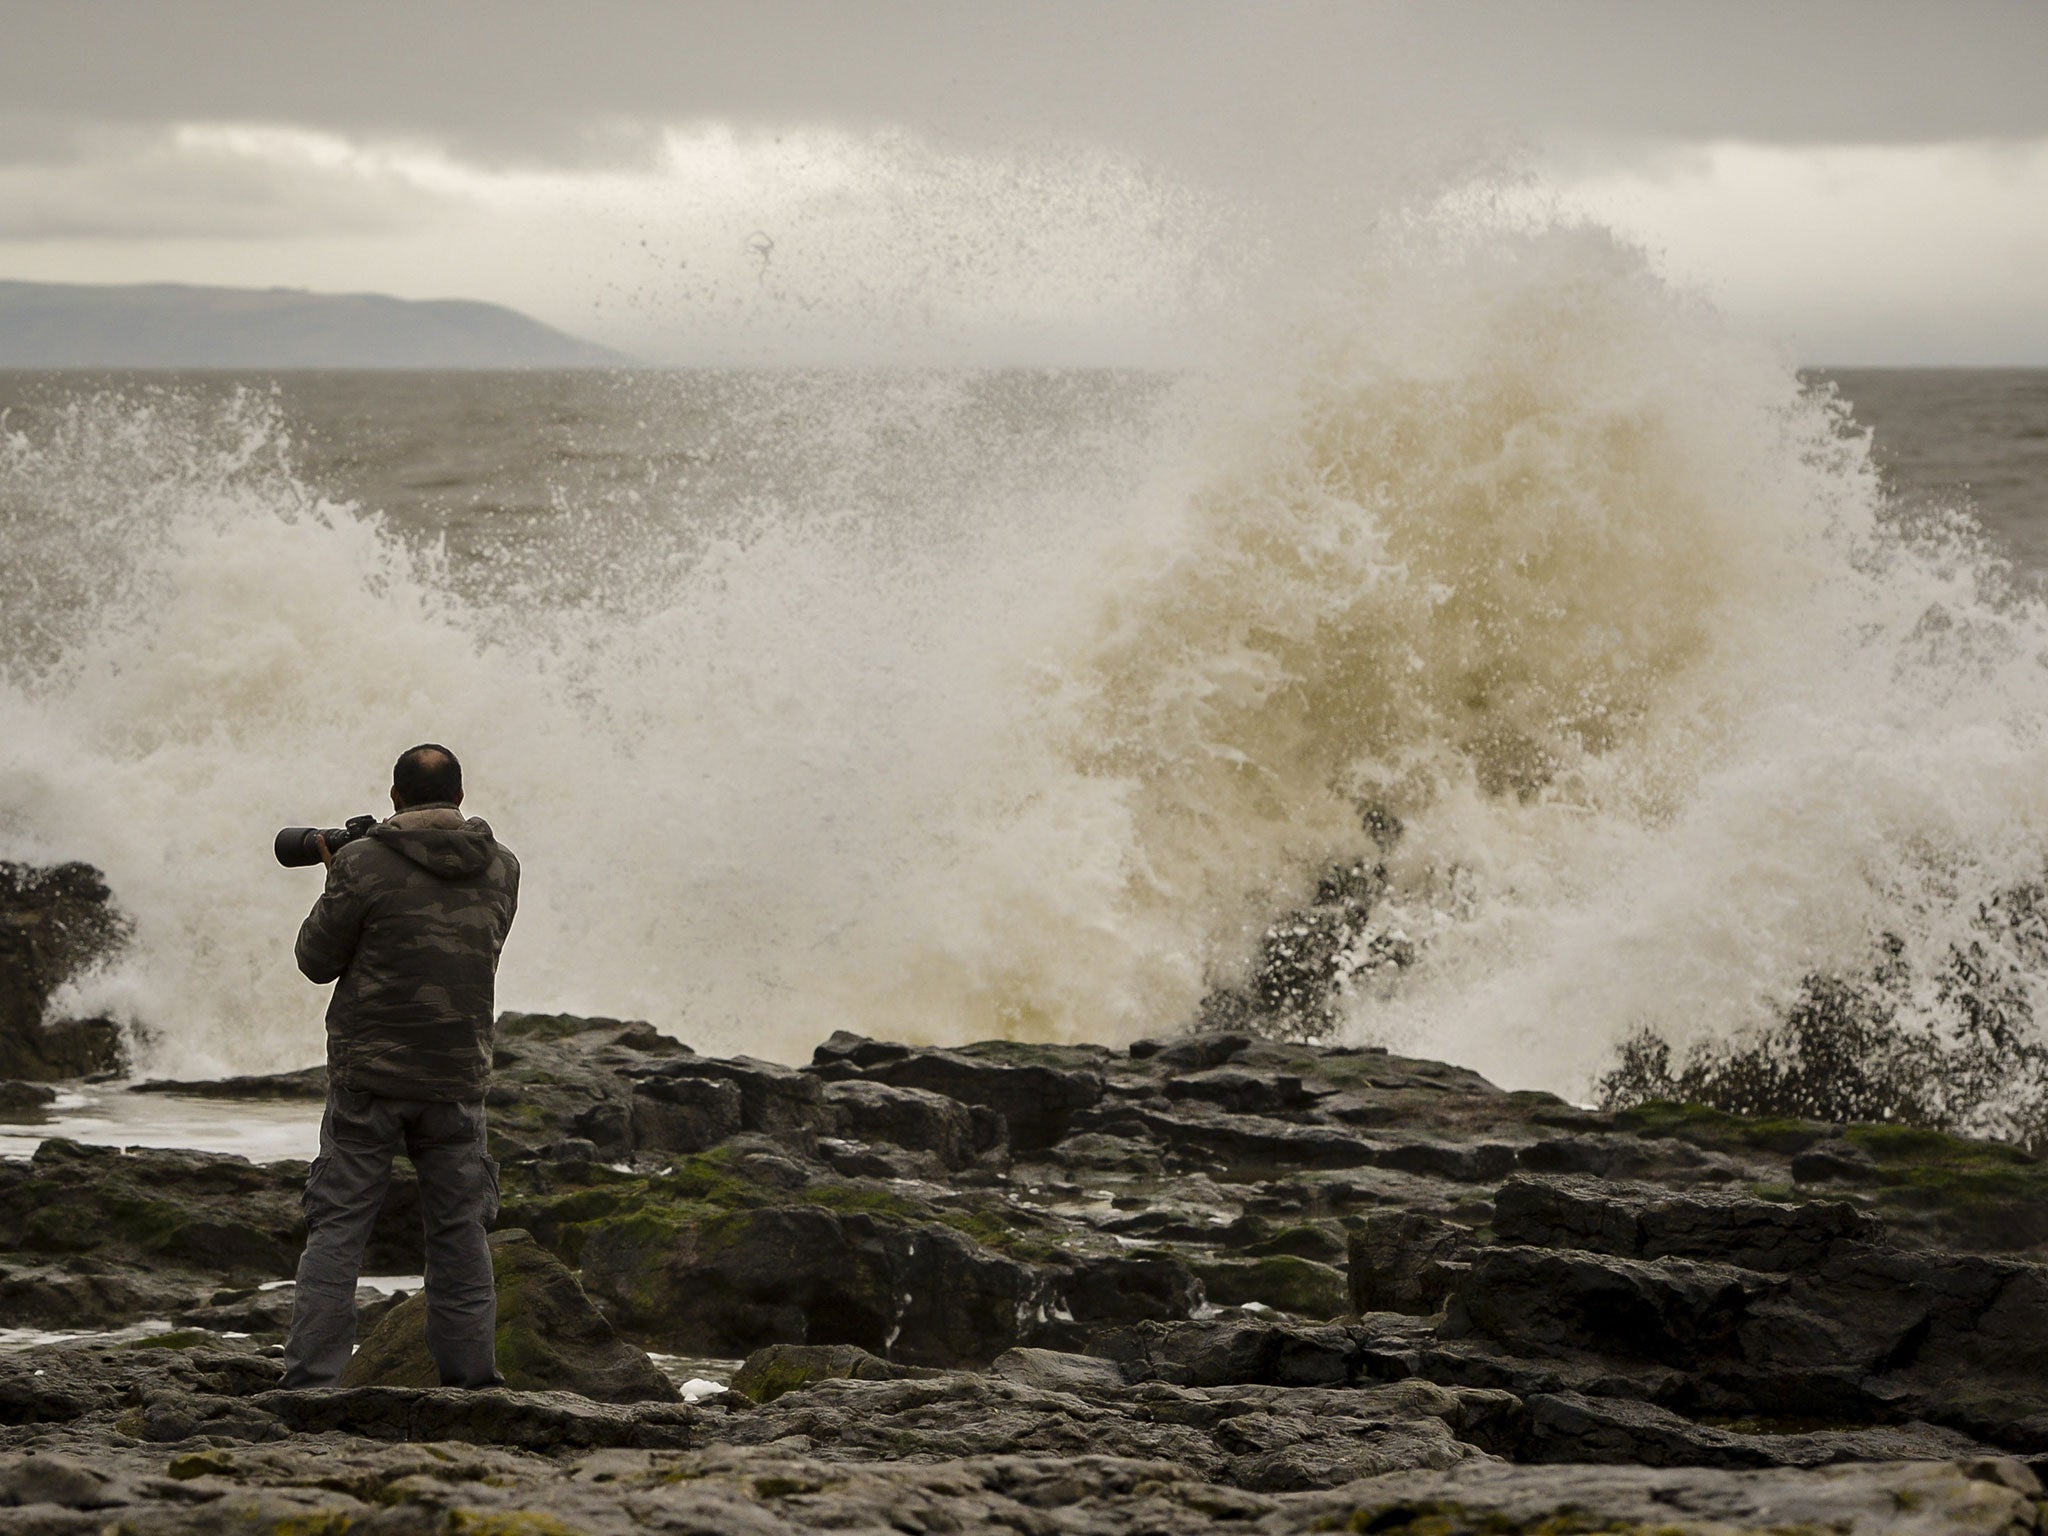 File image: A man photographs waves on Porthcawl Beach in South Wales, as gale force winds and torrential rain sweep across Britain